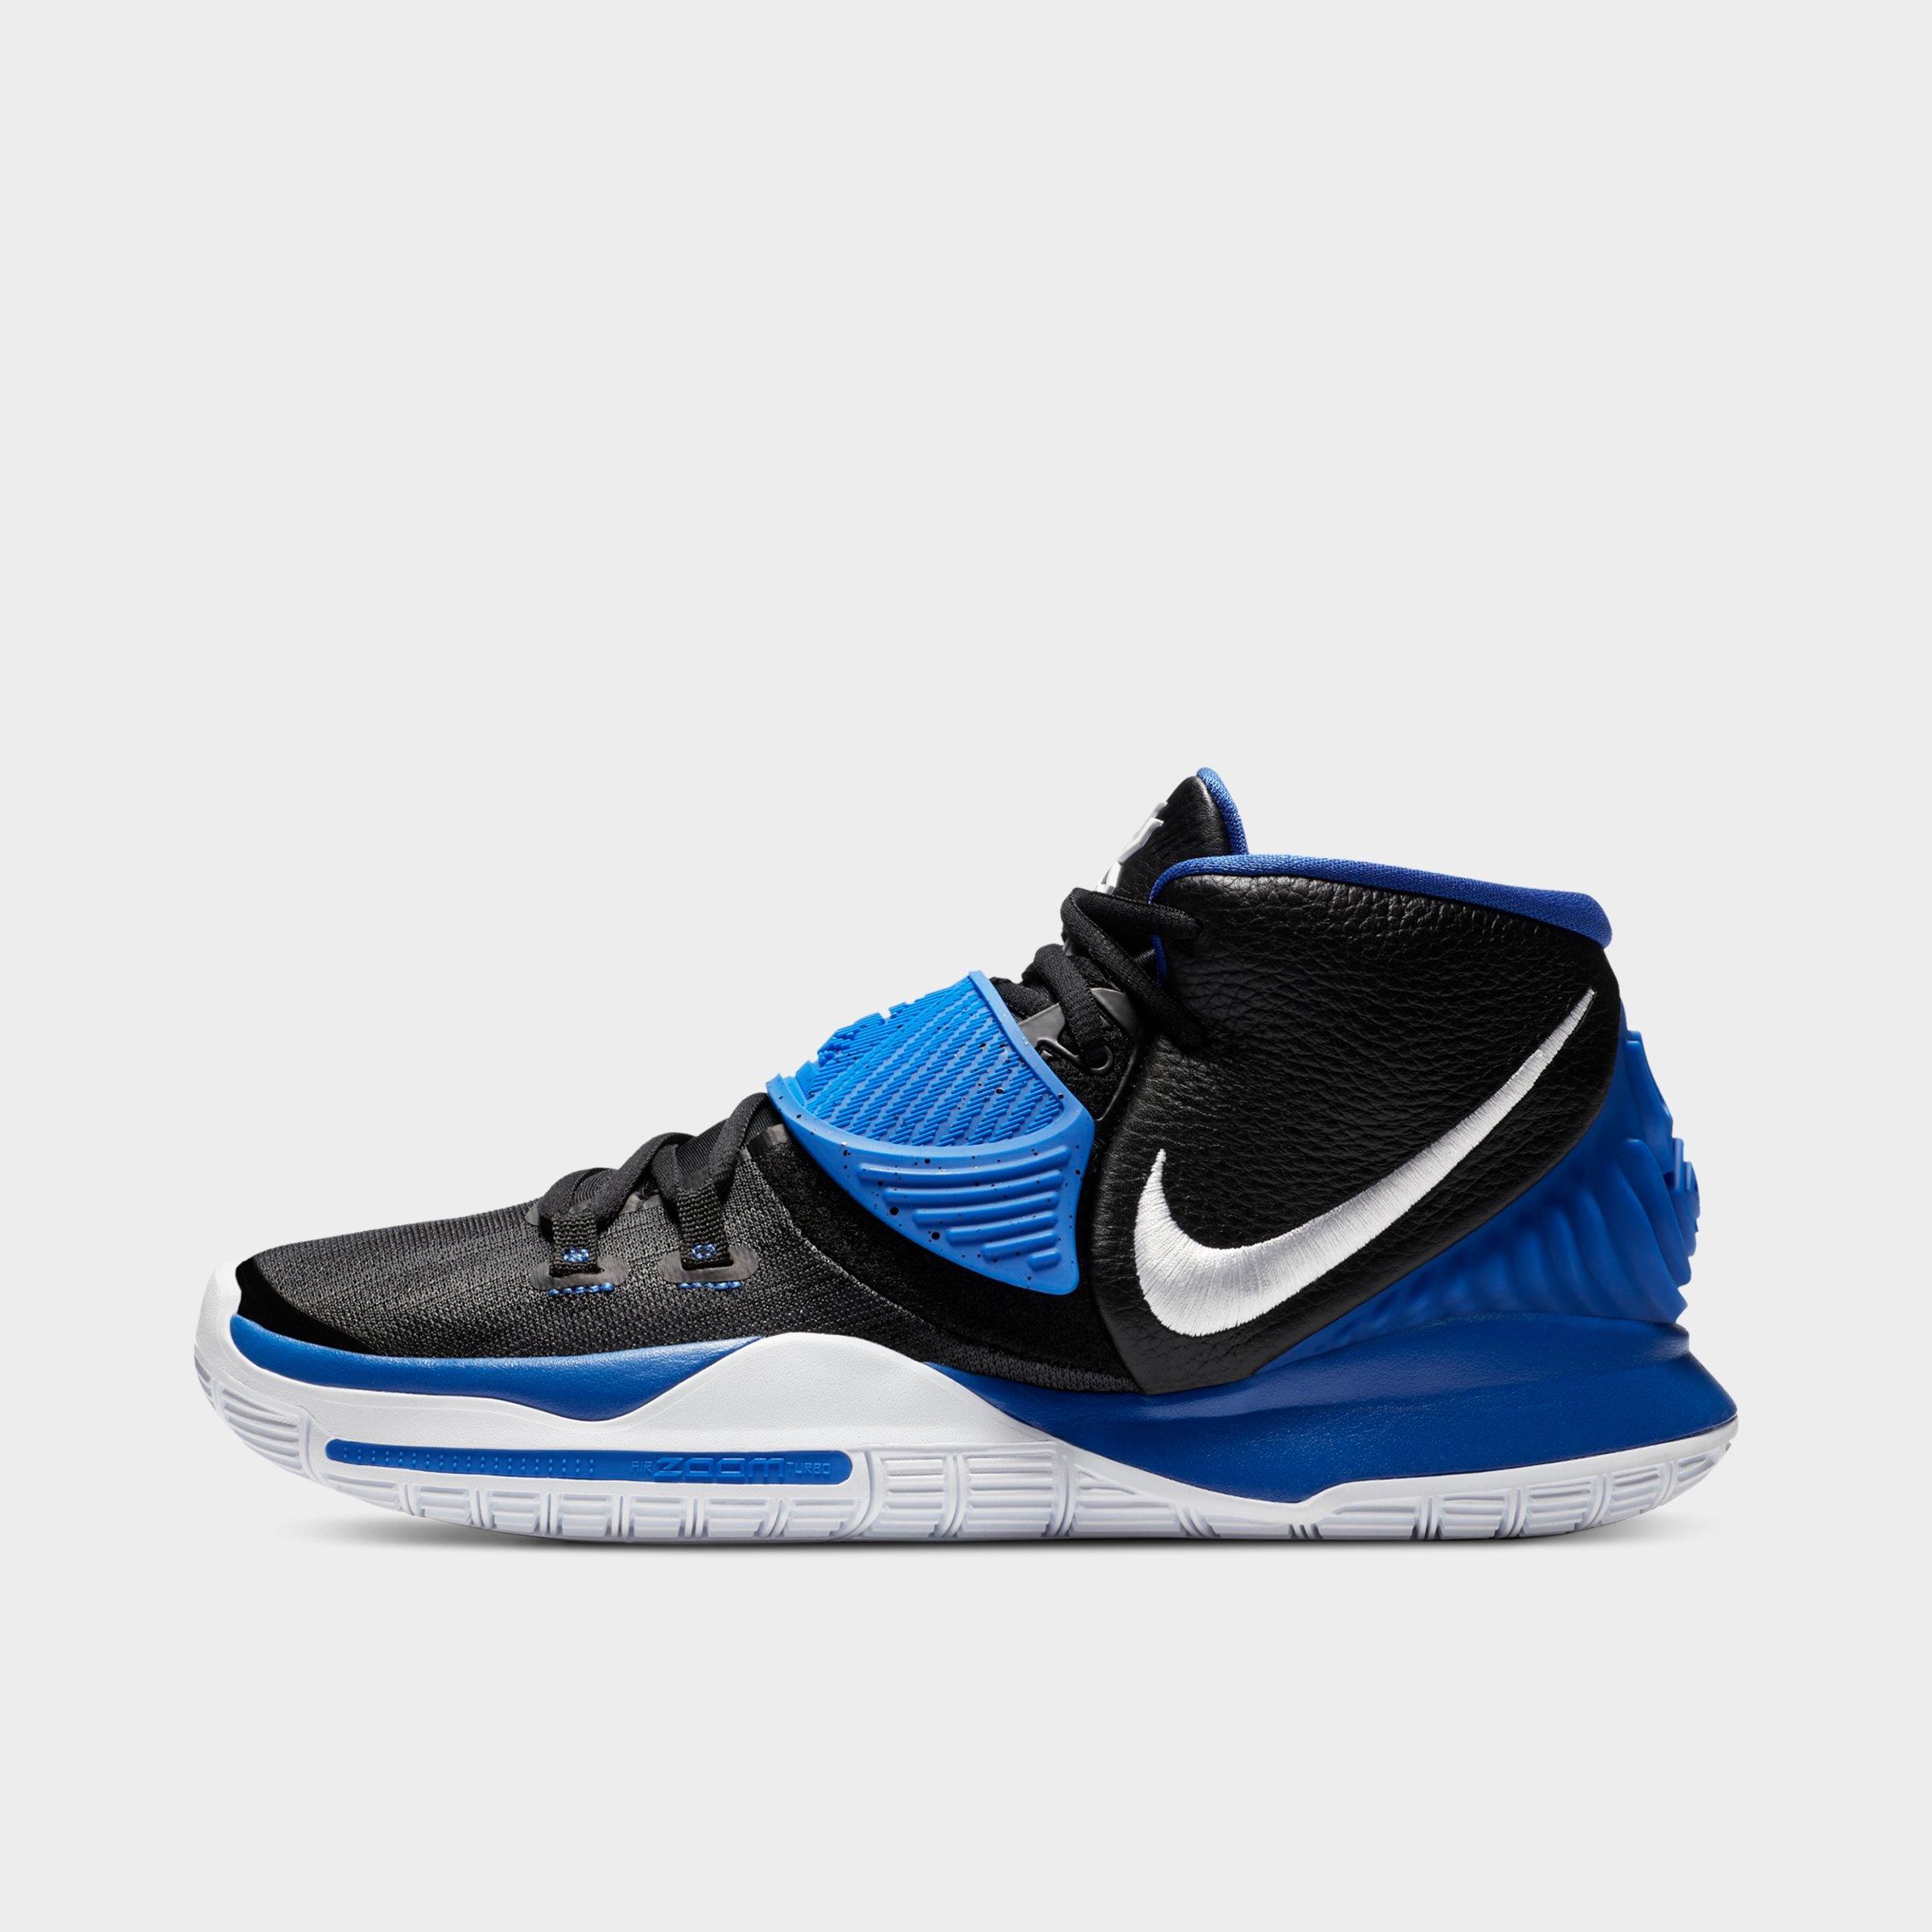 Kyrie Irving Shoes | Nike Kyrie 